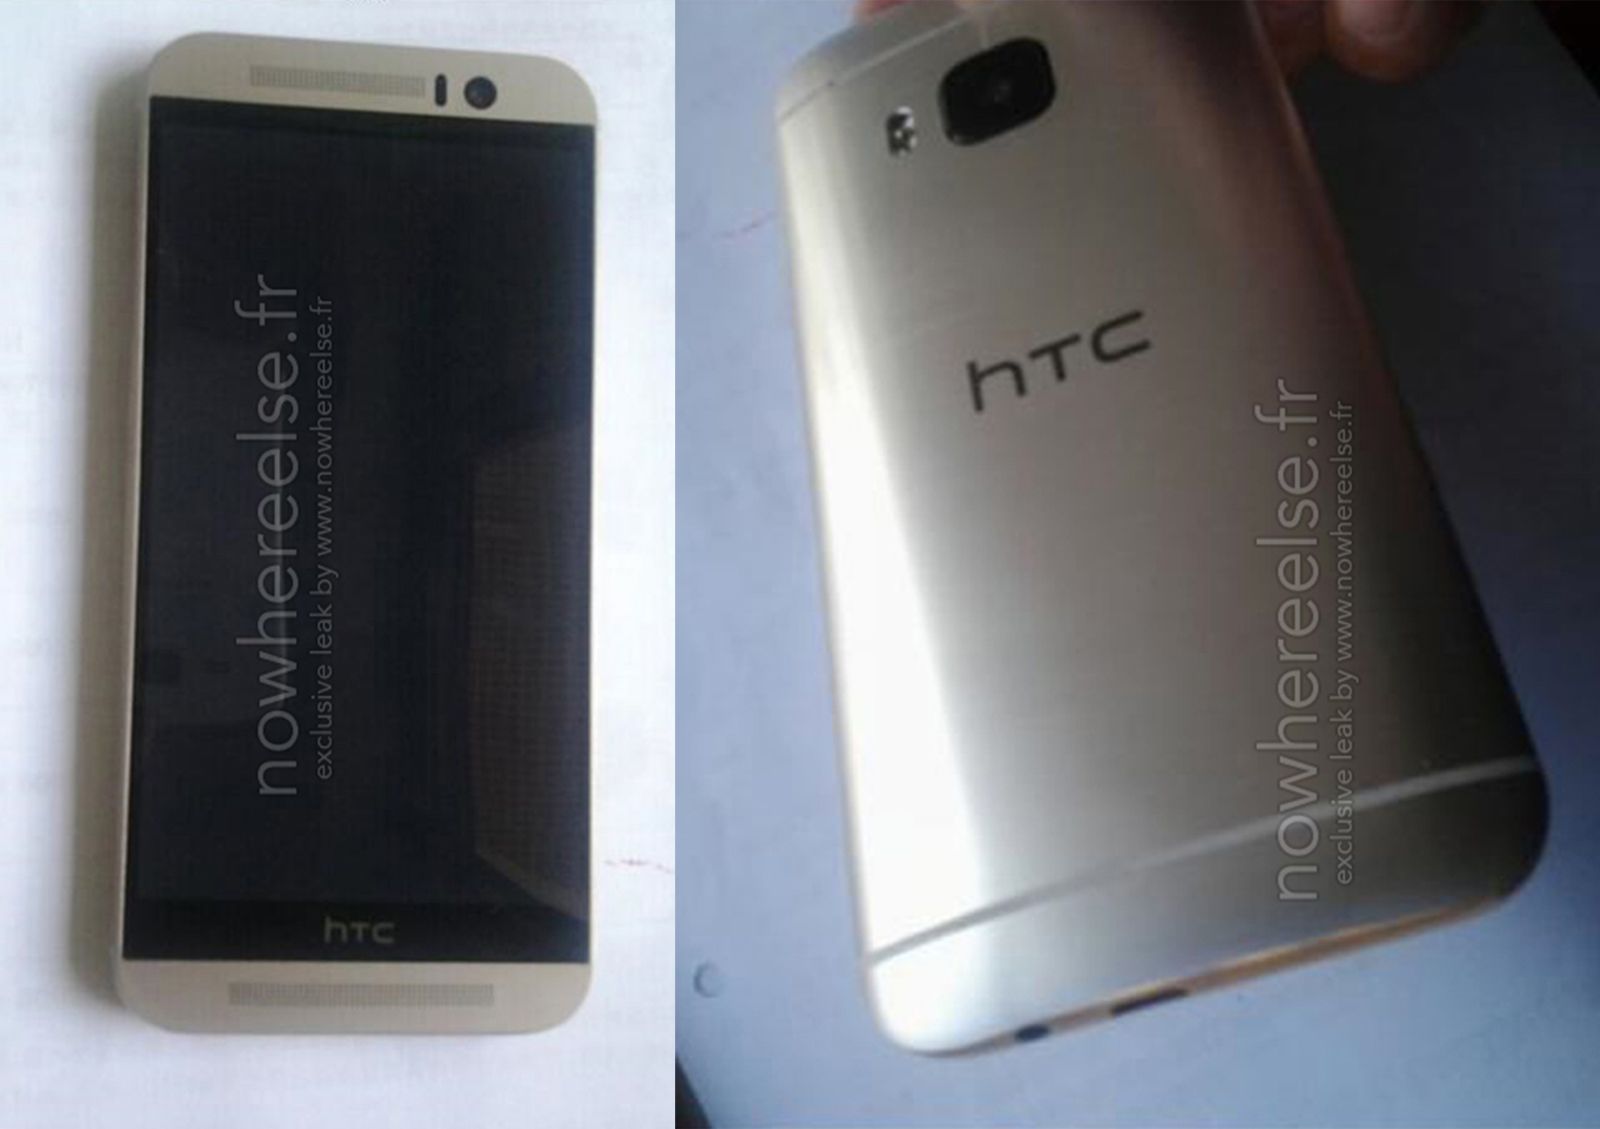 htc one m9 photos leak with full specs 1080p snapdragon 810 and 20 7mp image 1